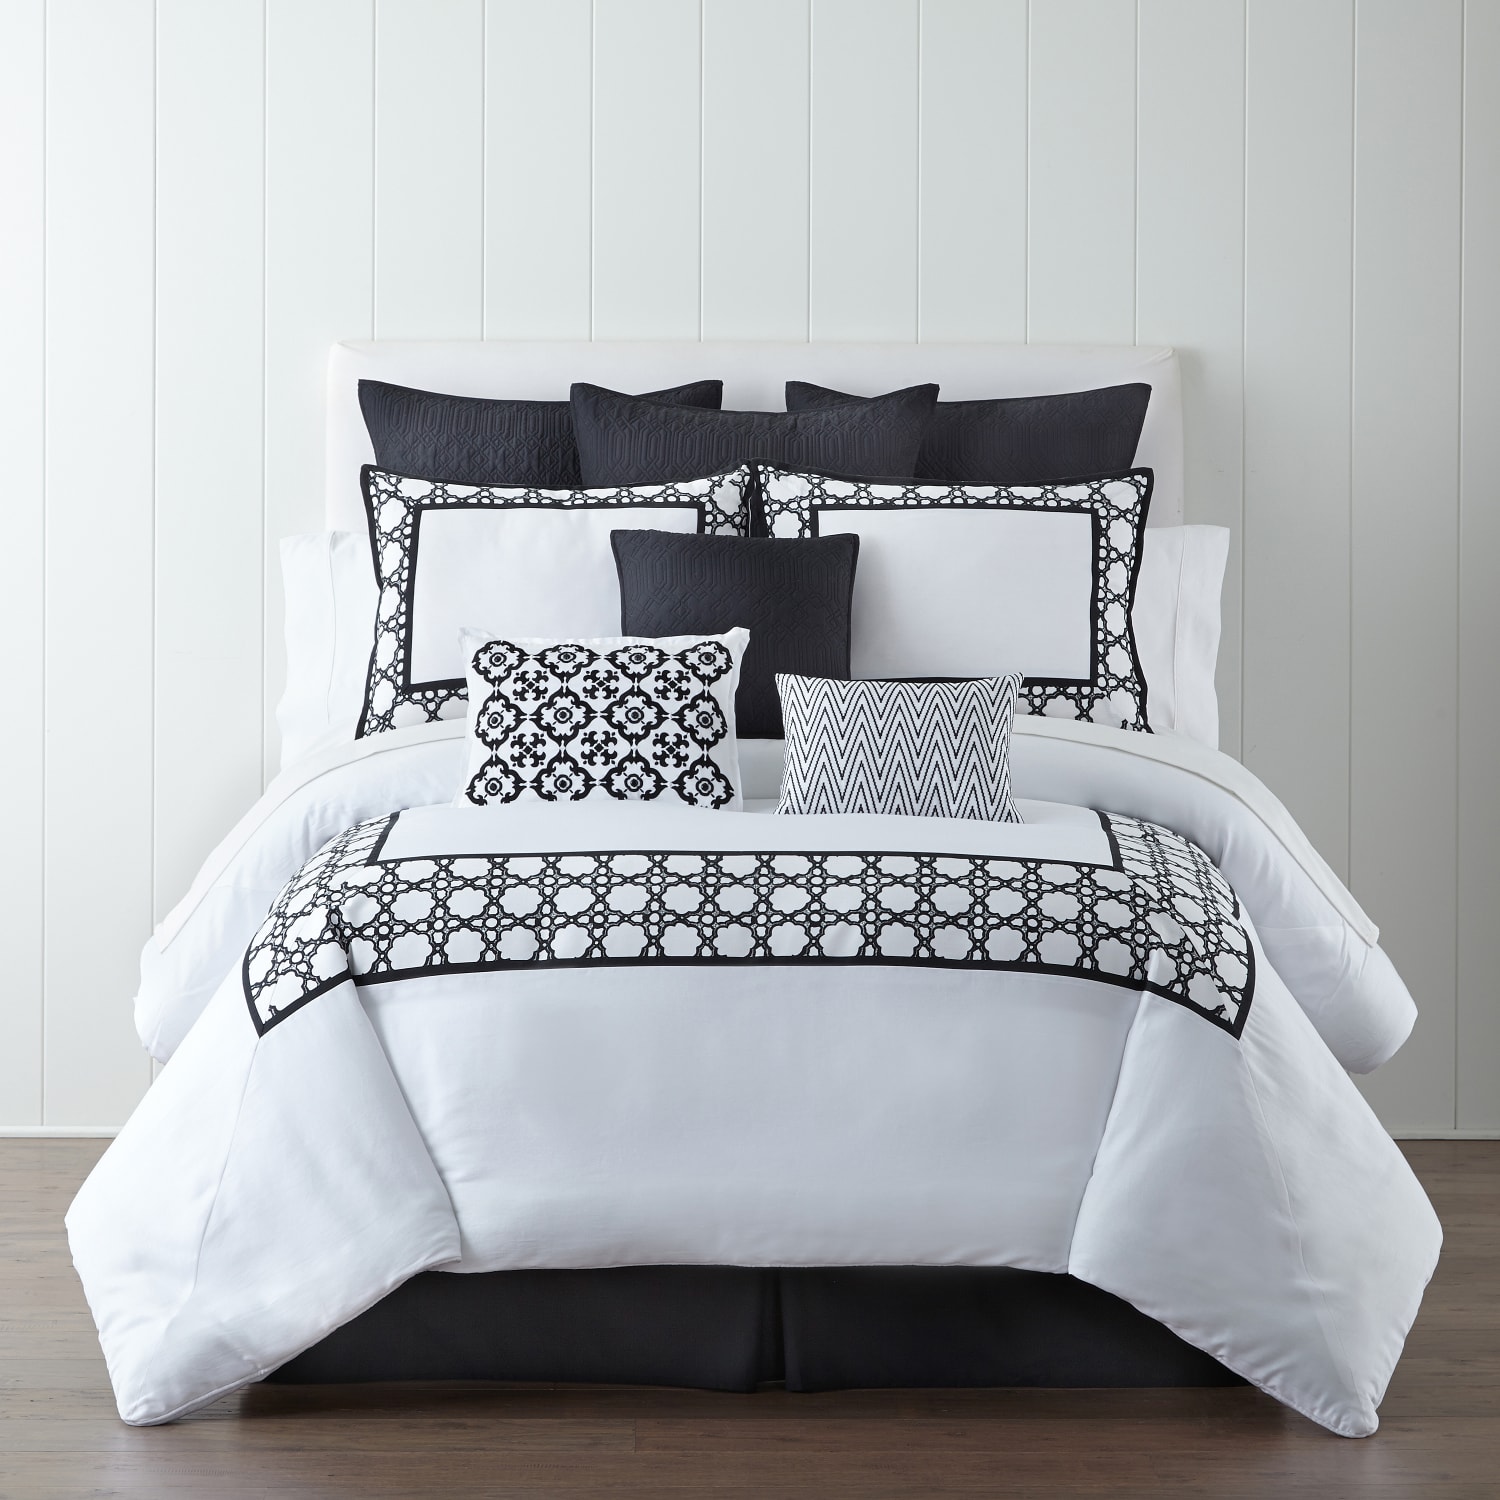 Eva Longoria at JCPenney: New Affordable Bath + Bedding Collections